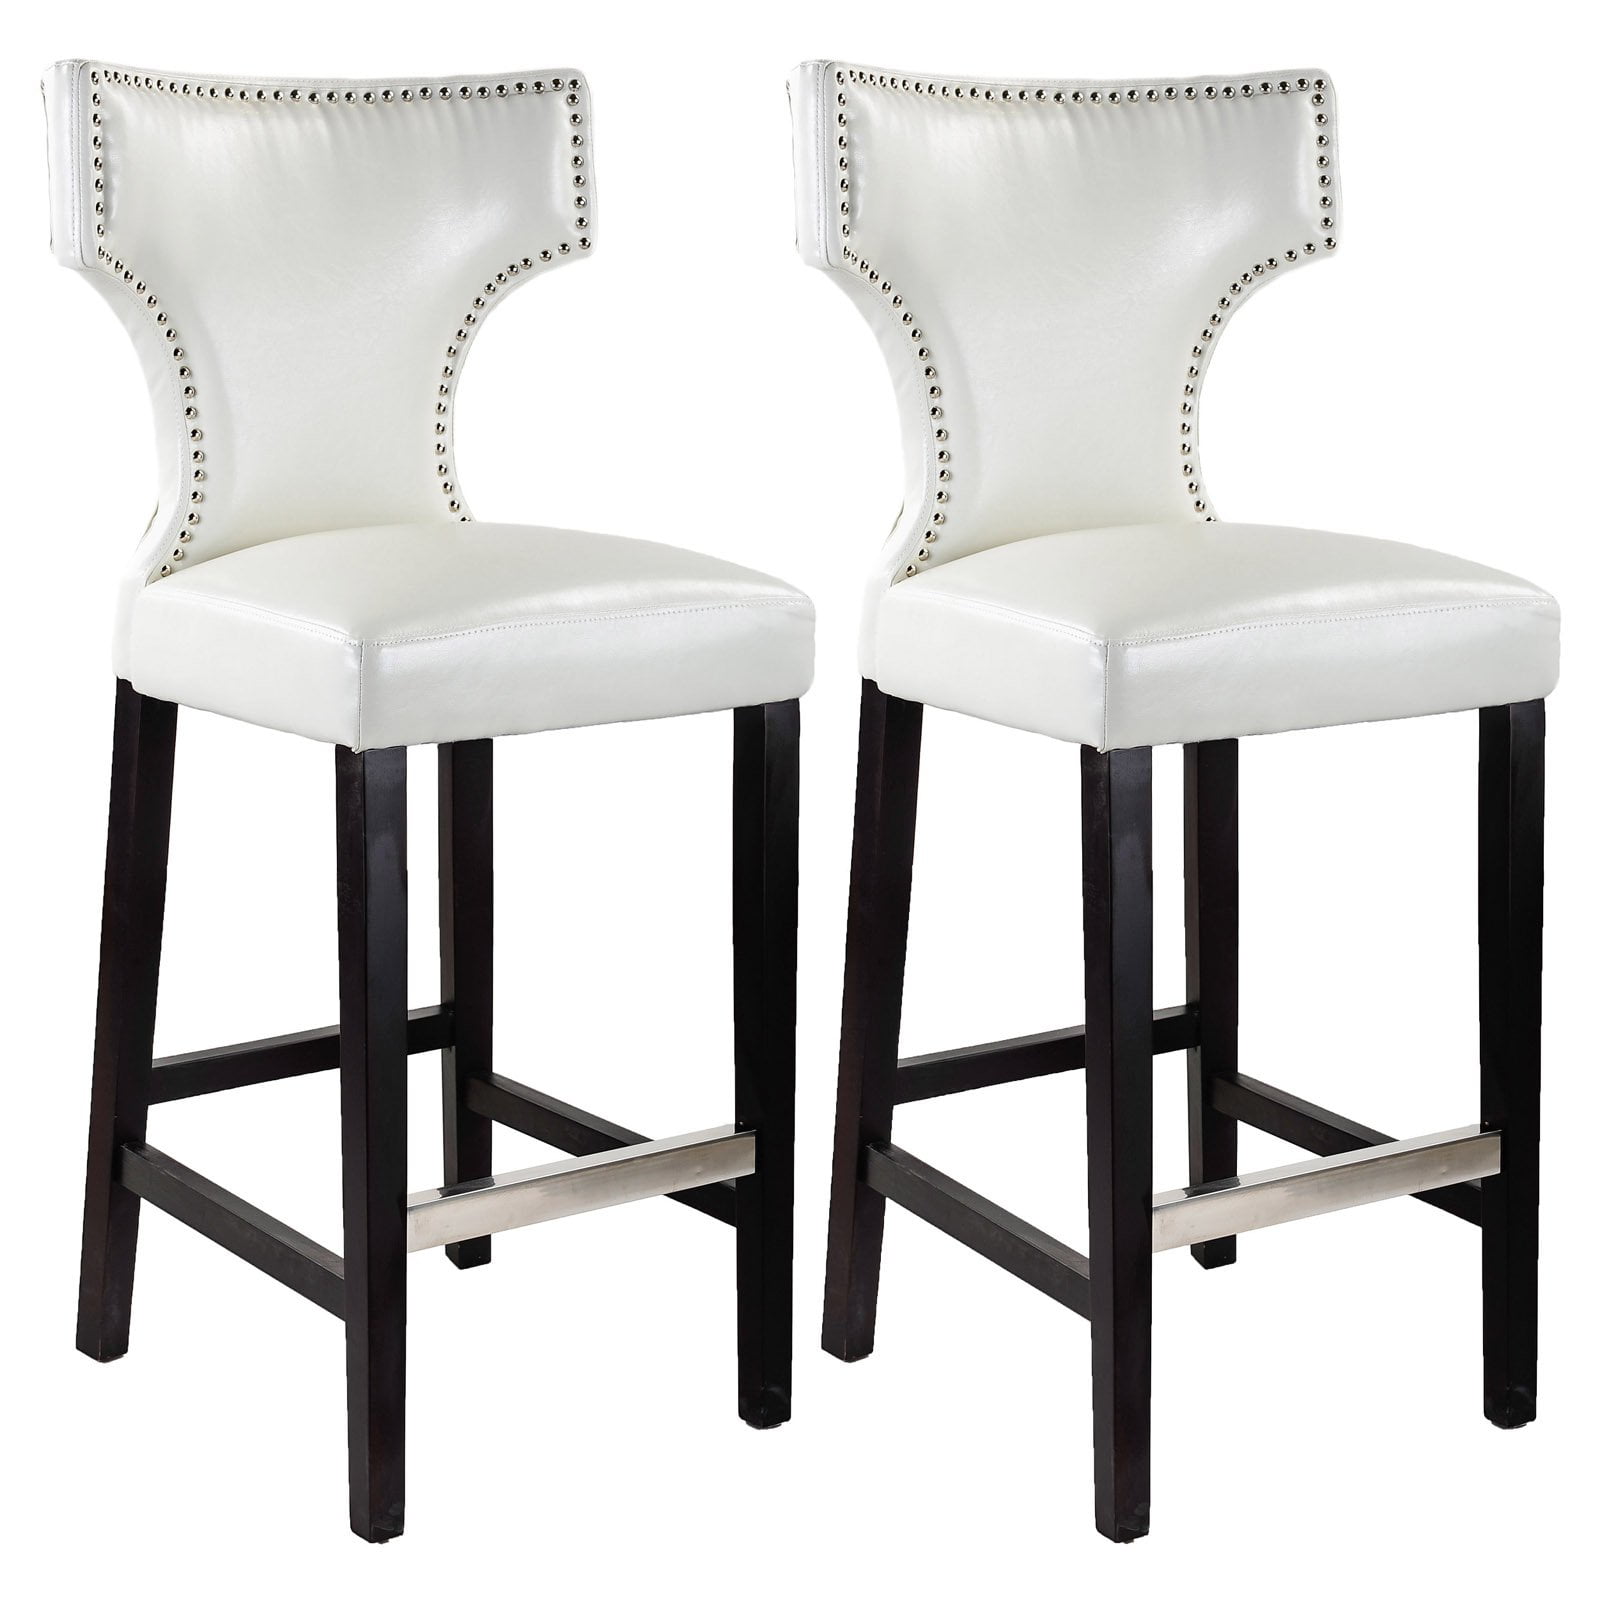 Corliving Kings 30 Bar Height Barstool, How Tall Should Bar Stool Be For 42 Inch Counter